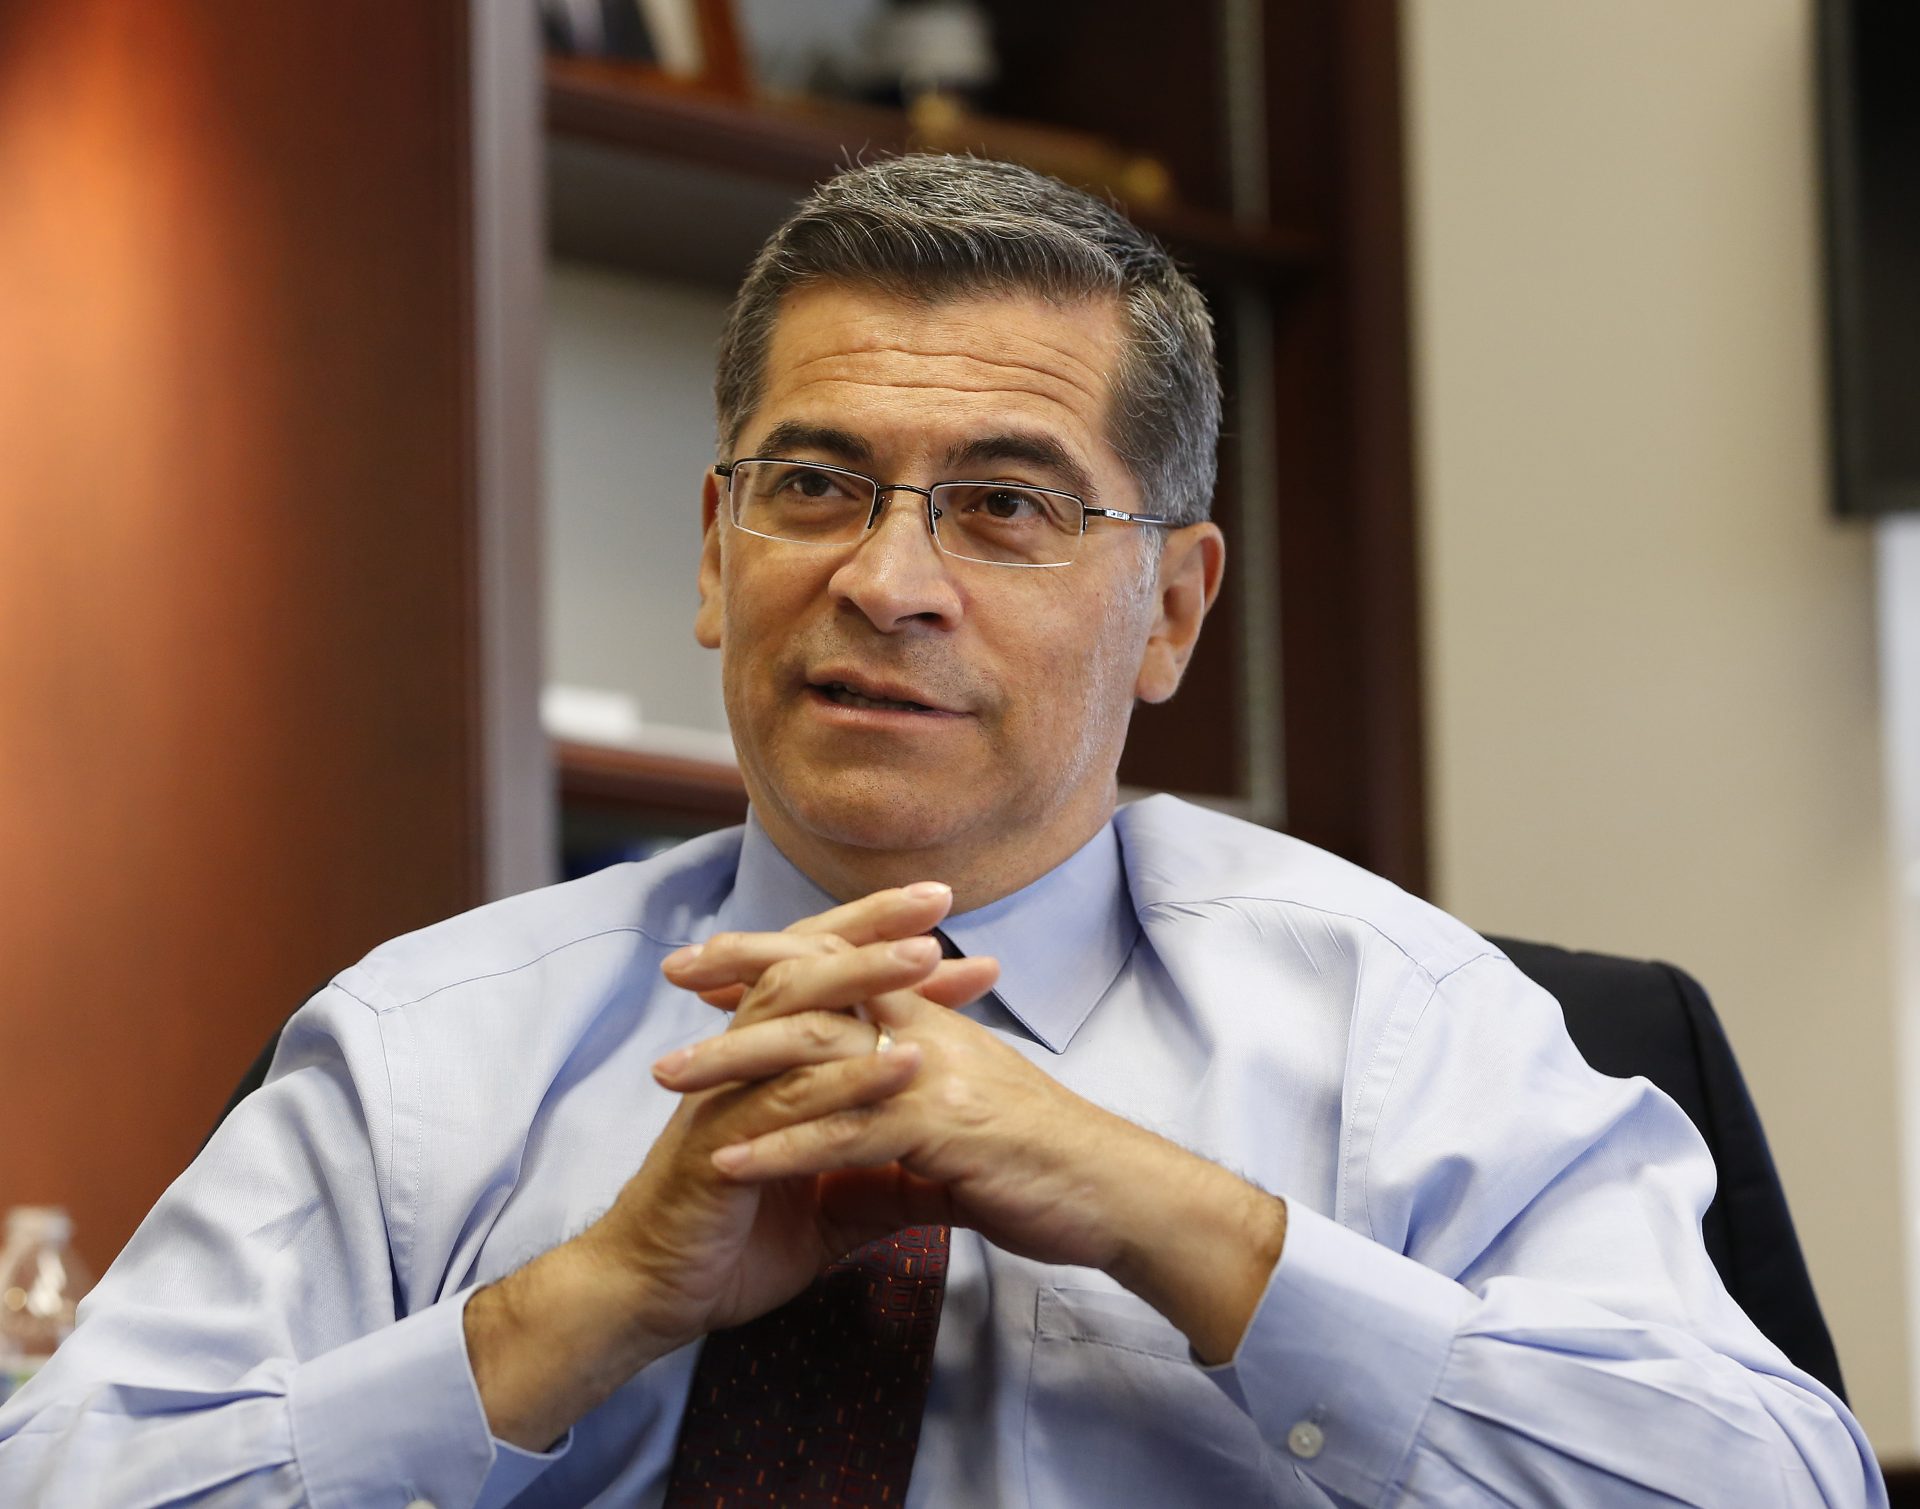 In this Oct. 10, 2018, file photo, California Attorney General Xavier Becerra discusses various issues during an interview with The Associated Press, in Sacramento, Calif.